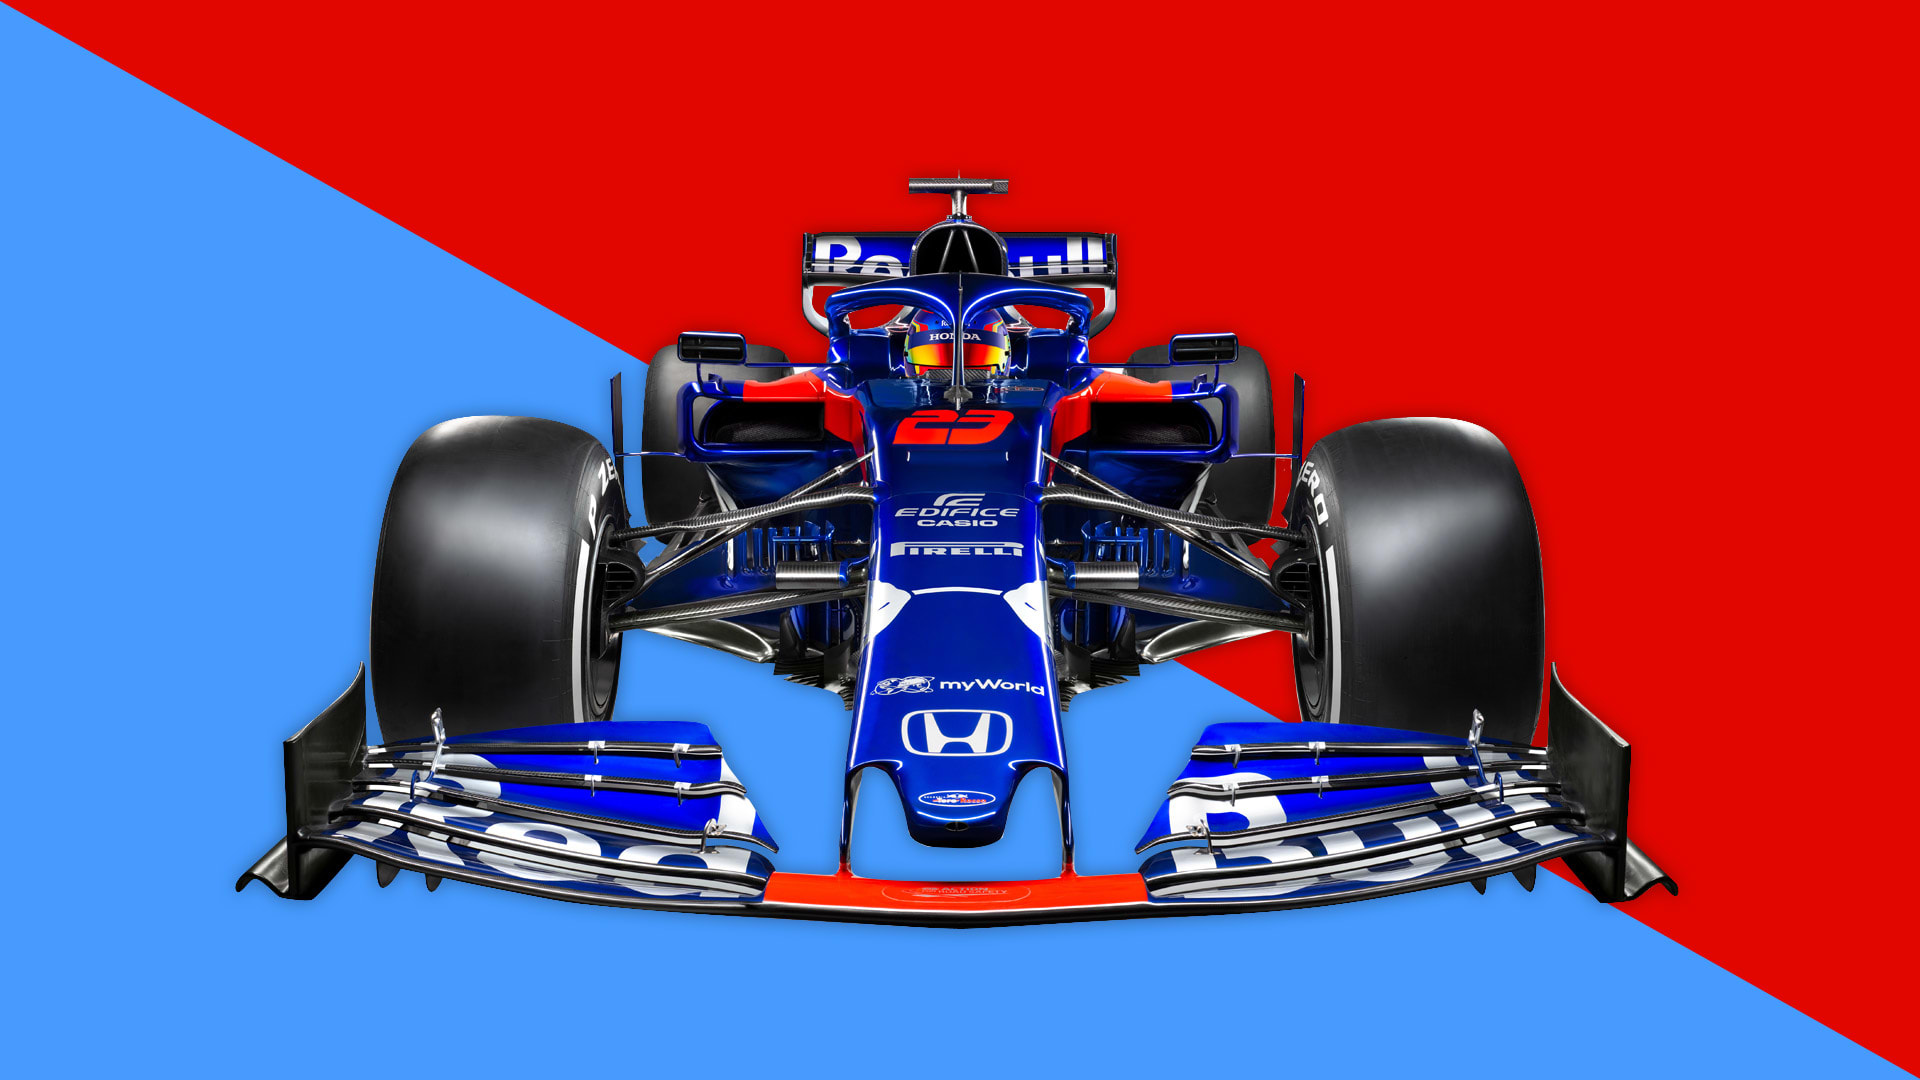 Toro Rosso Team Preview Best and worst case scenarios for the F1 team in 2019 Formula 1®